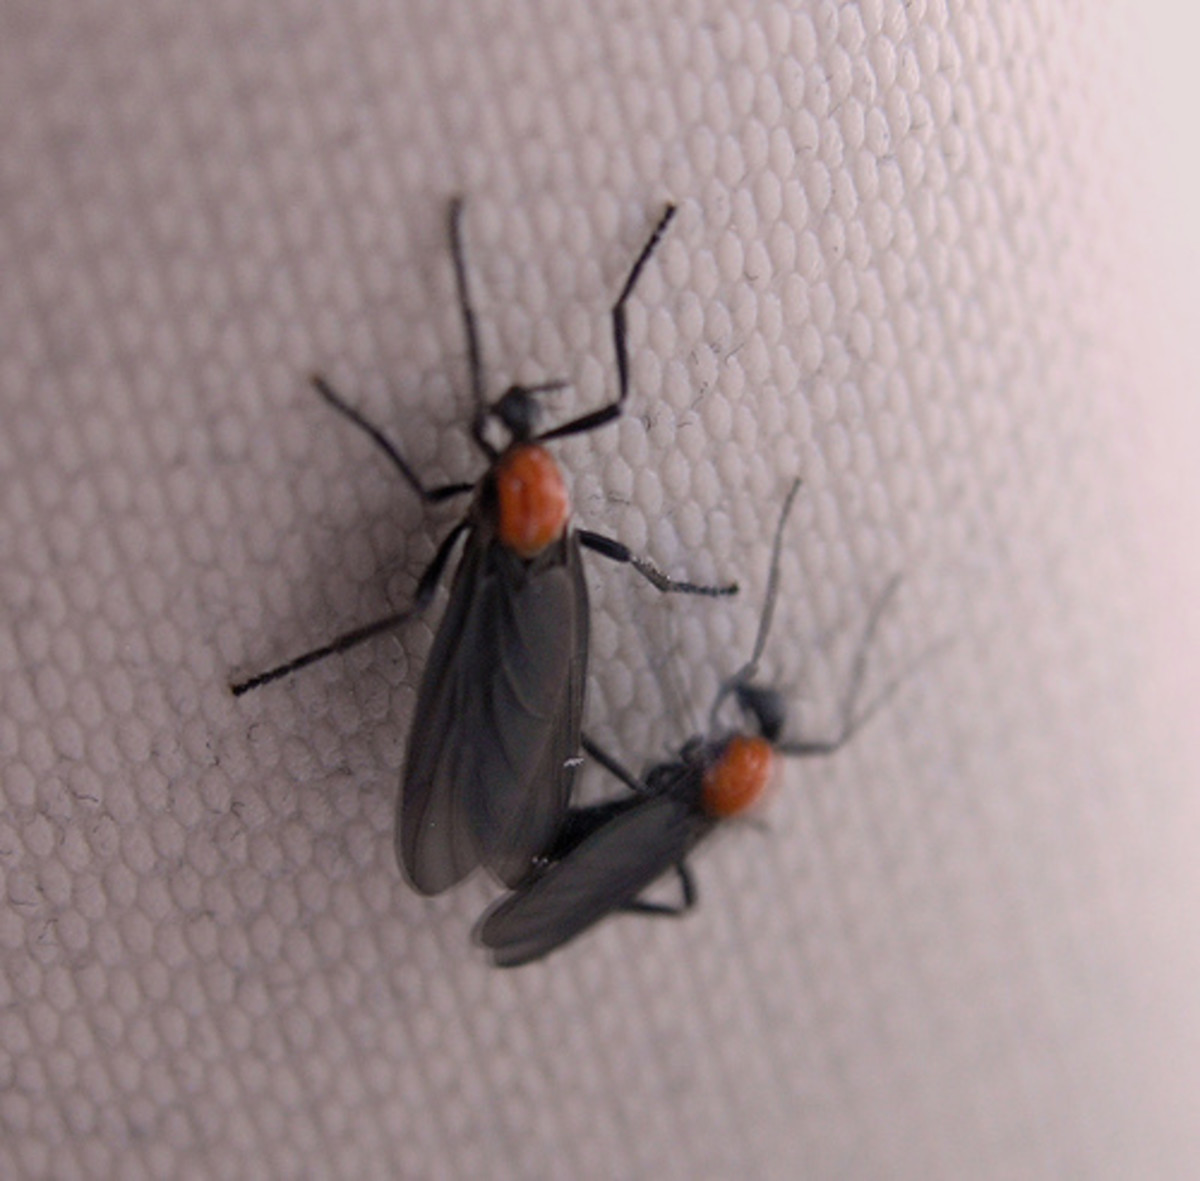 Love Bugs - Get a Room! How to Clean Love Bugs From Your Car.